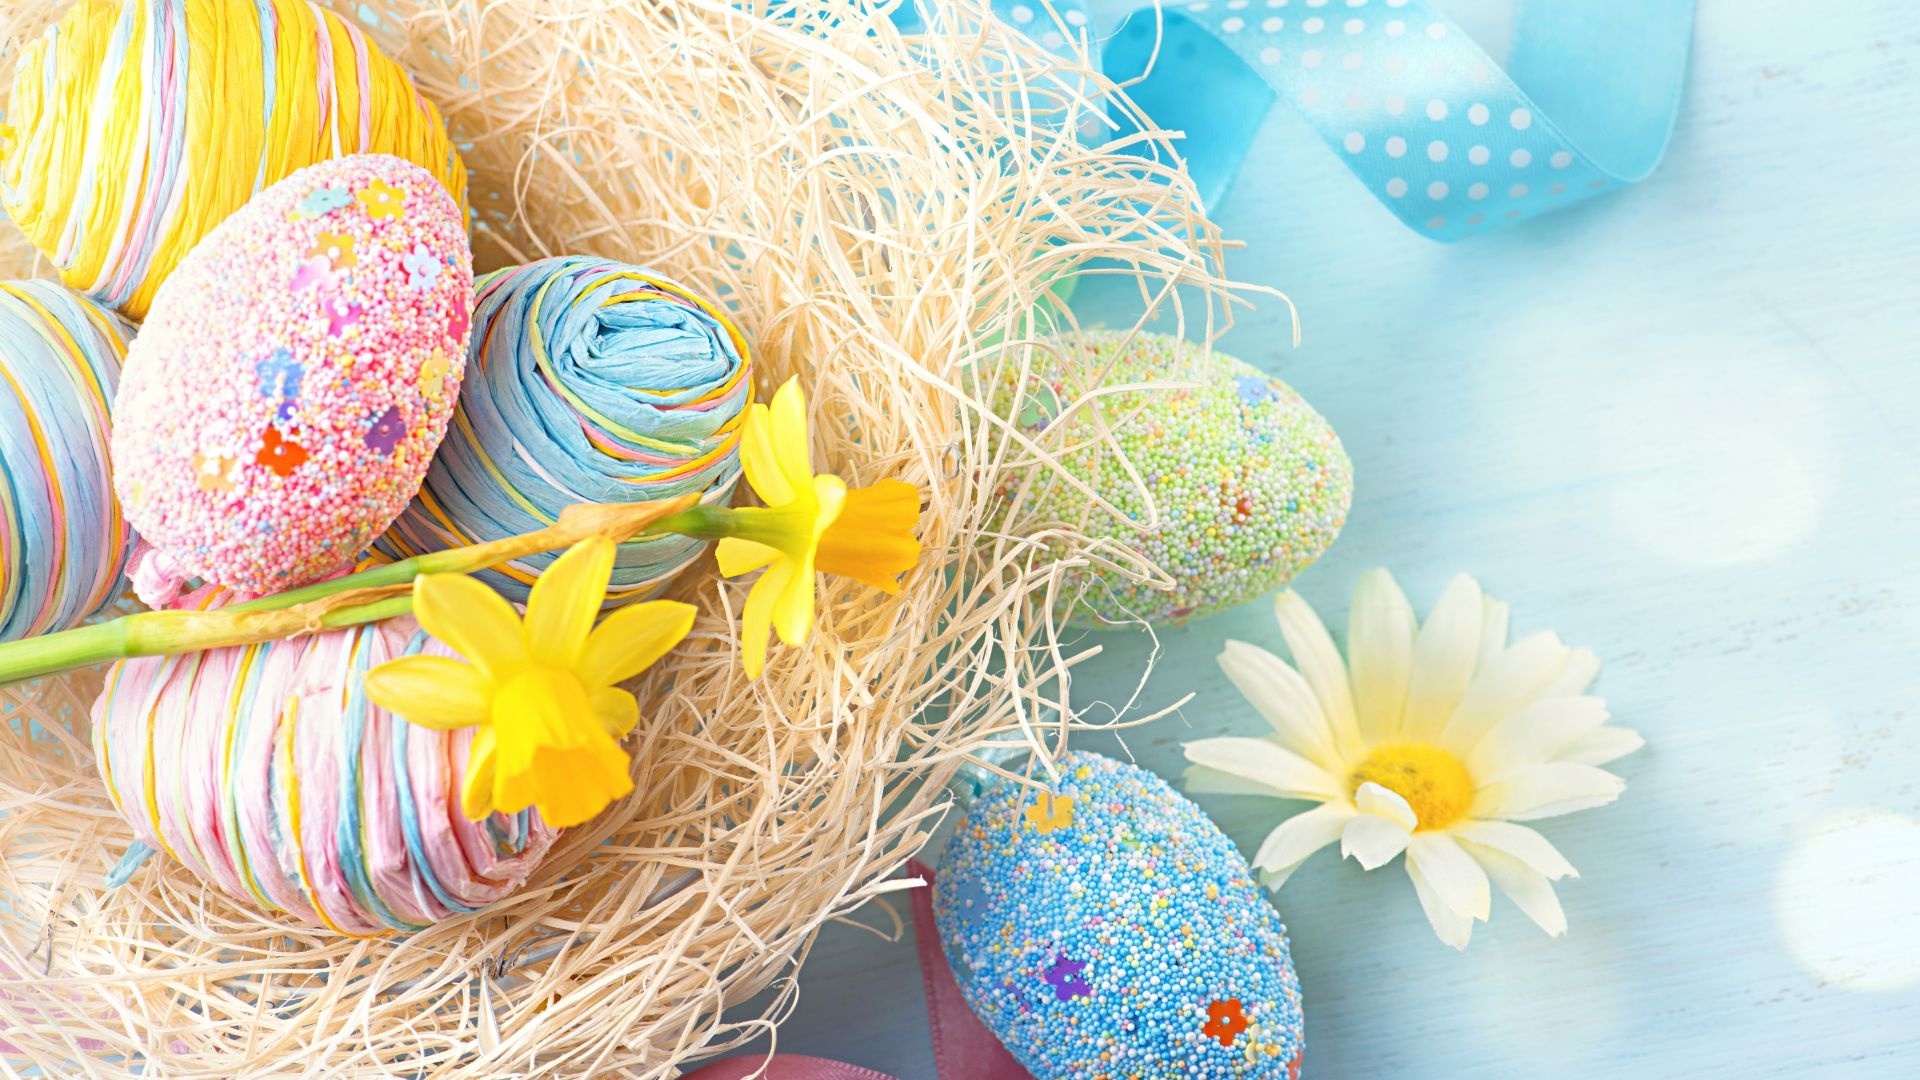 Background For Easter Card Pic